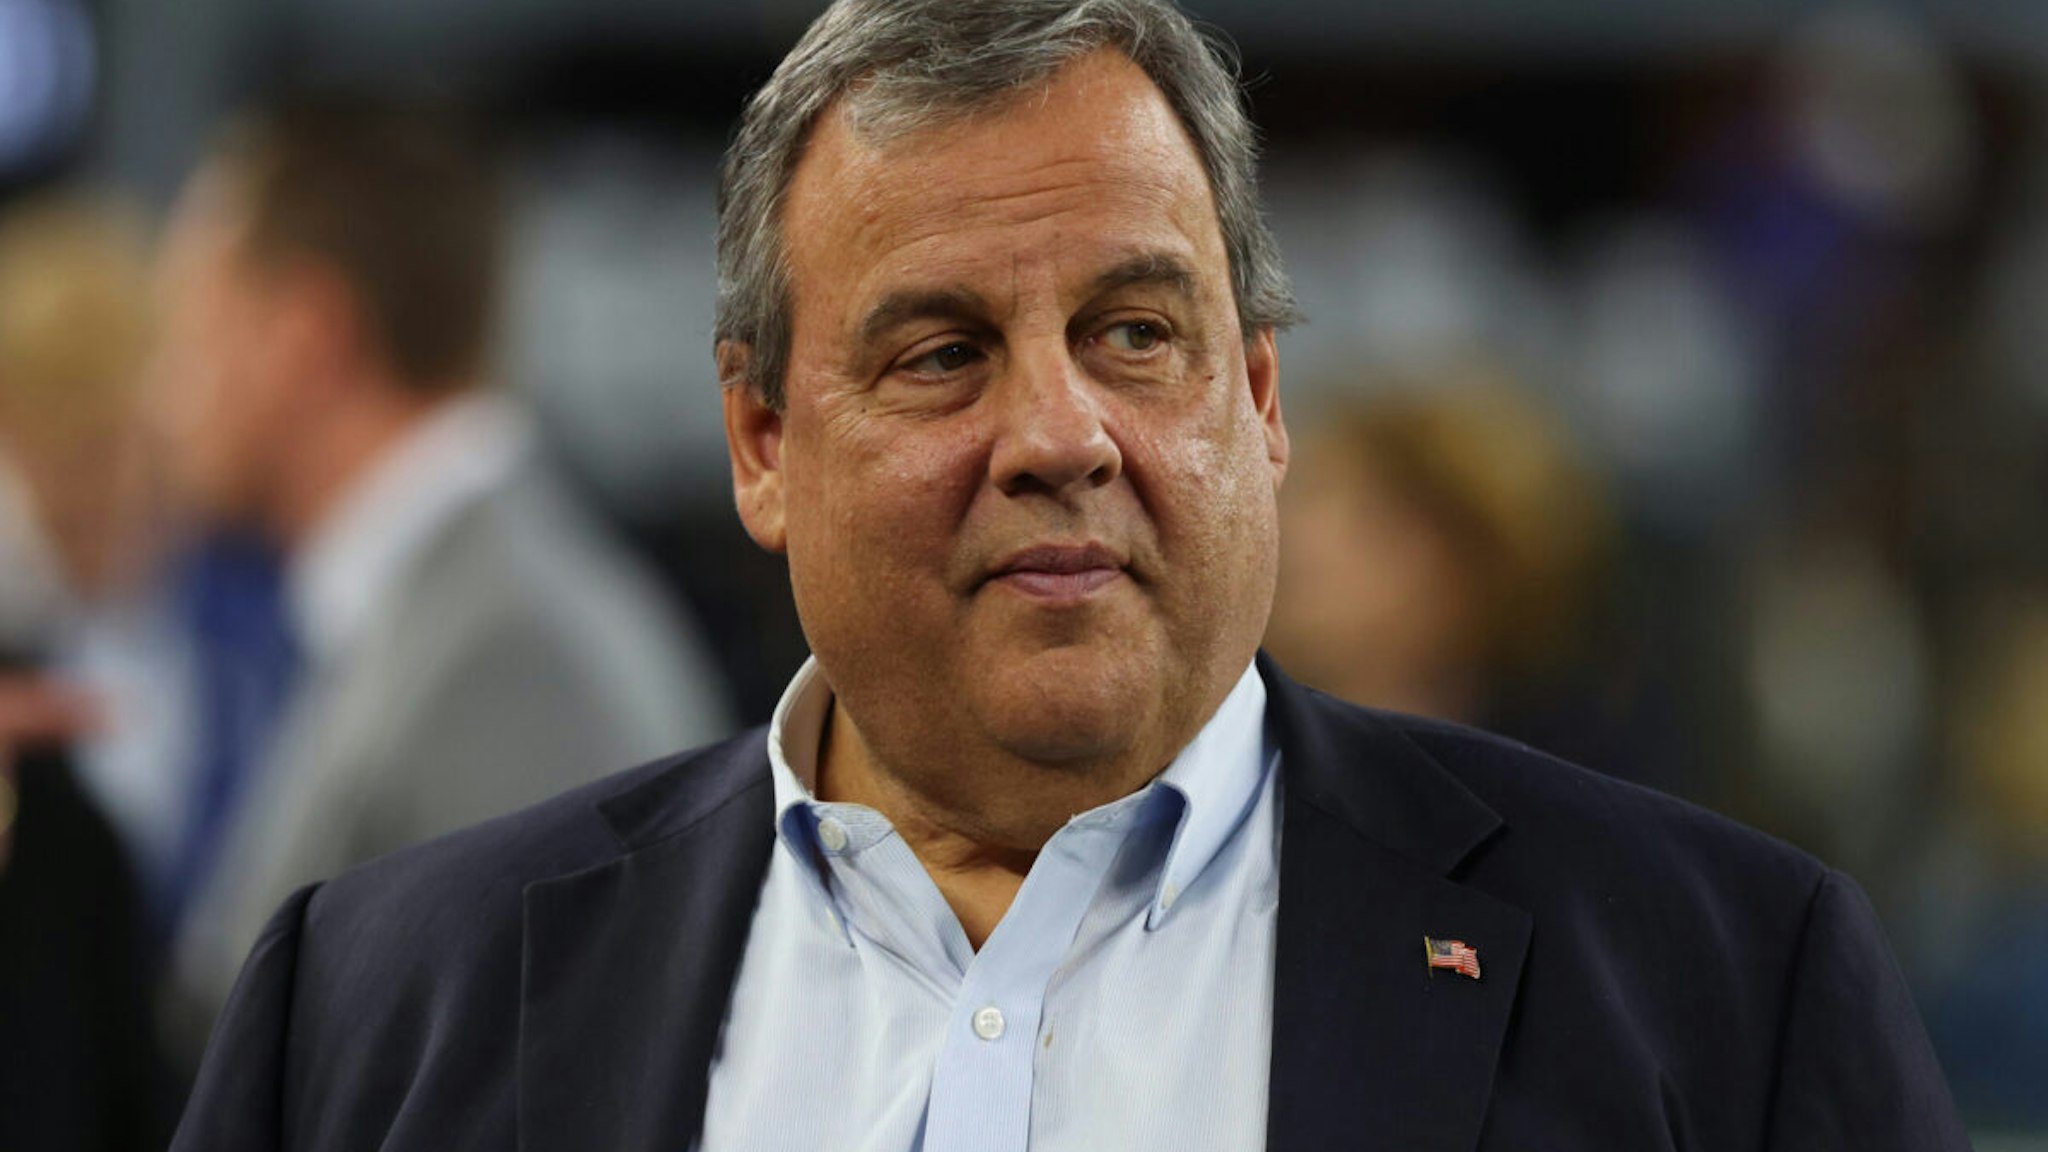 Former New Jersey Governor Chris Christie looks on prior to a game between the Indianapolis Colts and the Dallas Cowboys at AT&T Stadium on December 04, 2022 in Arlington, Texas.